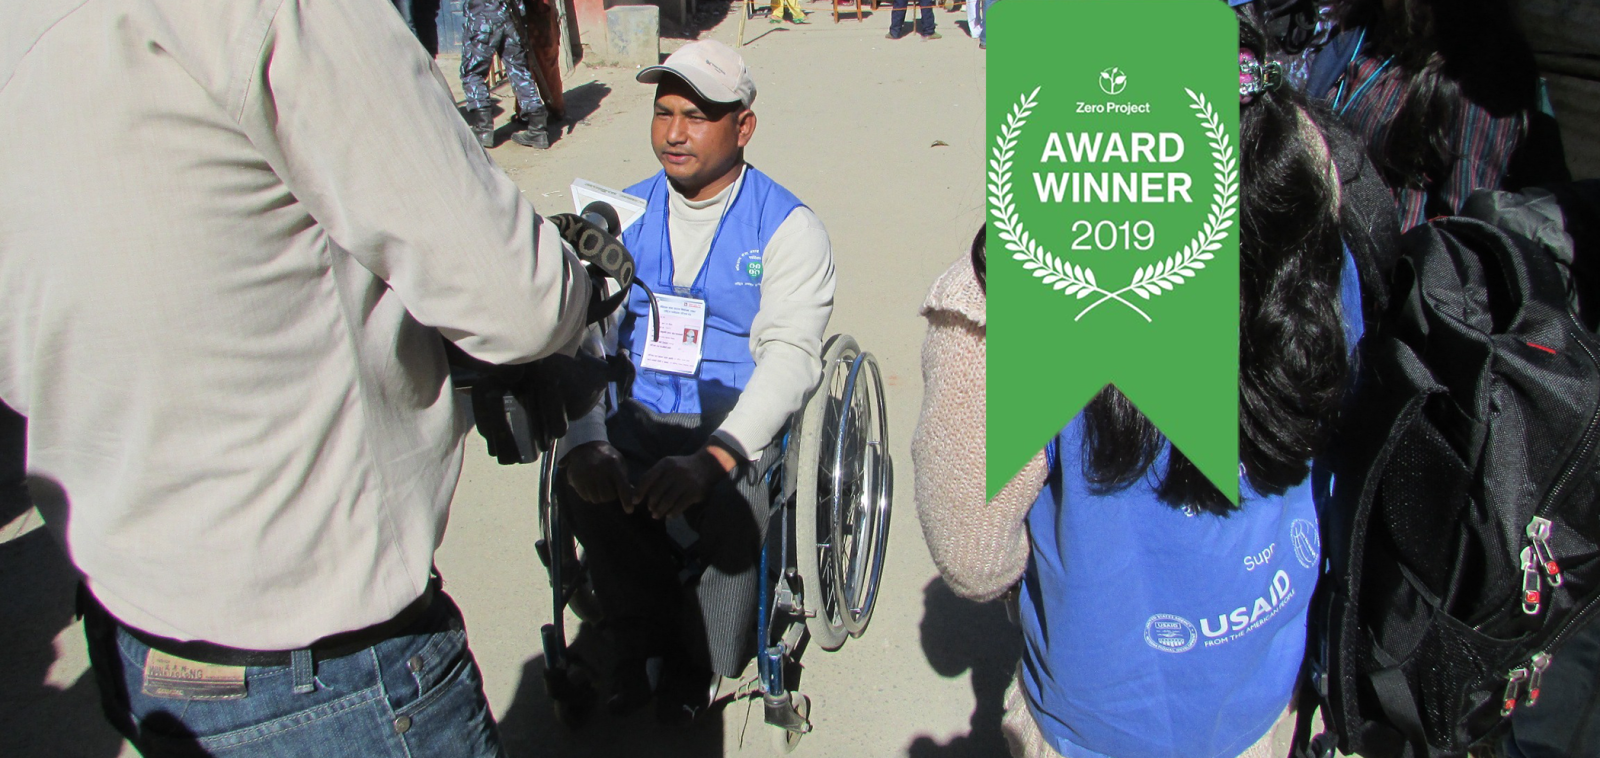 A member an election access observation team in Nepal is interviewed about his experience.